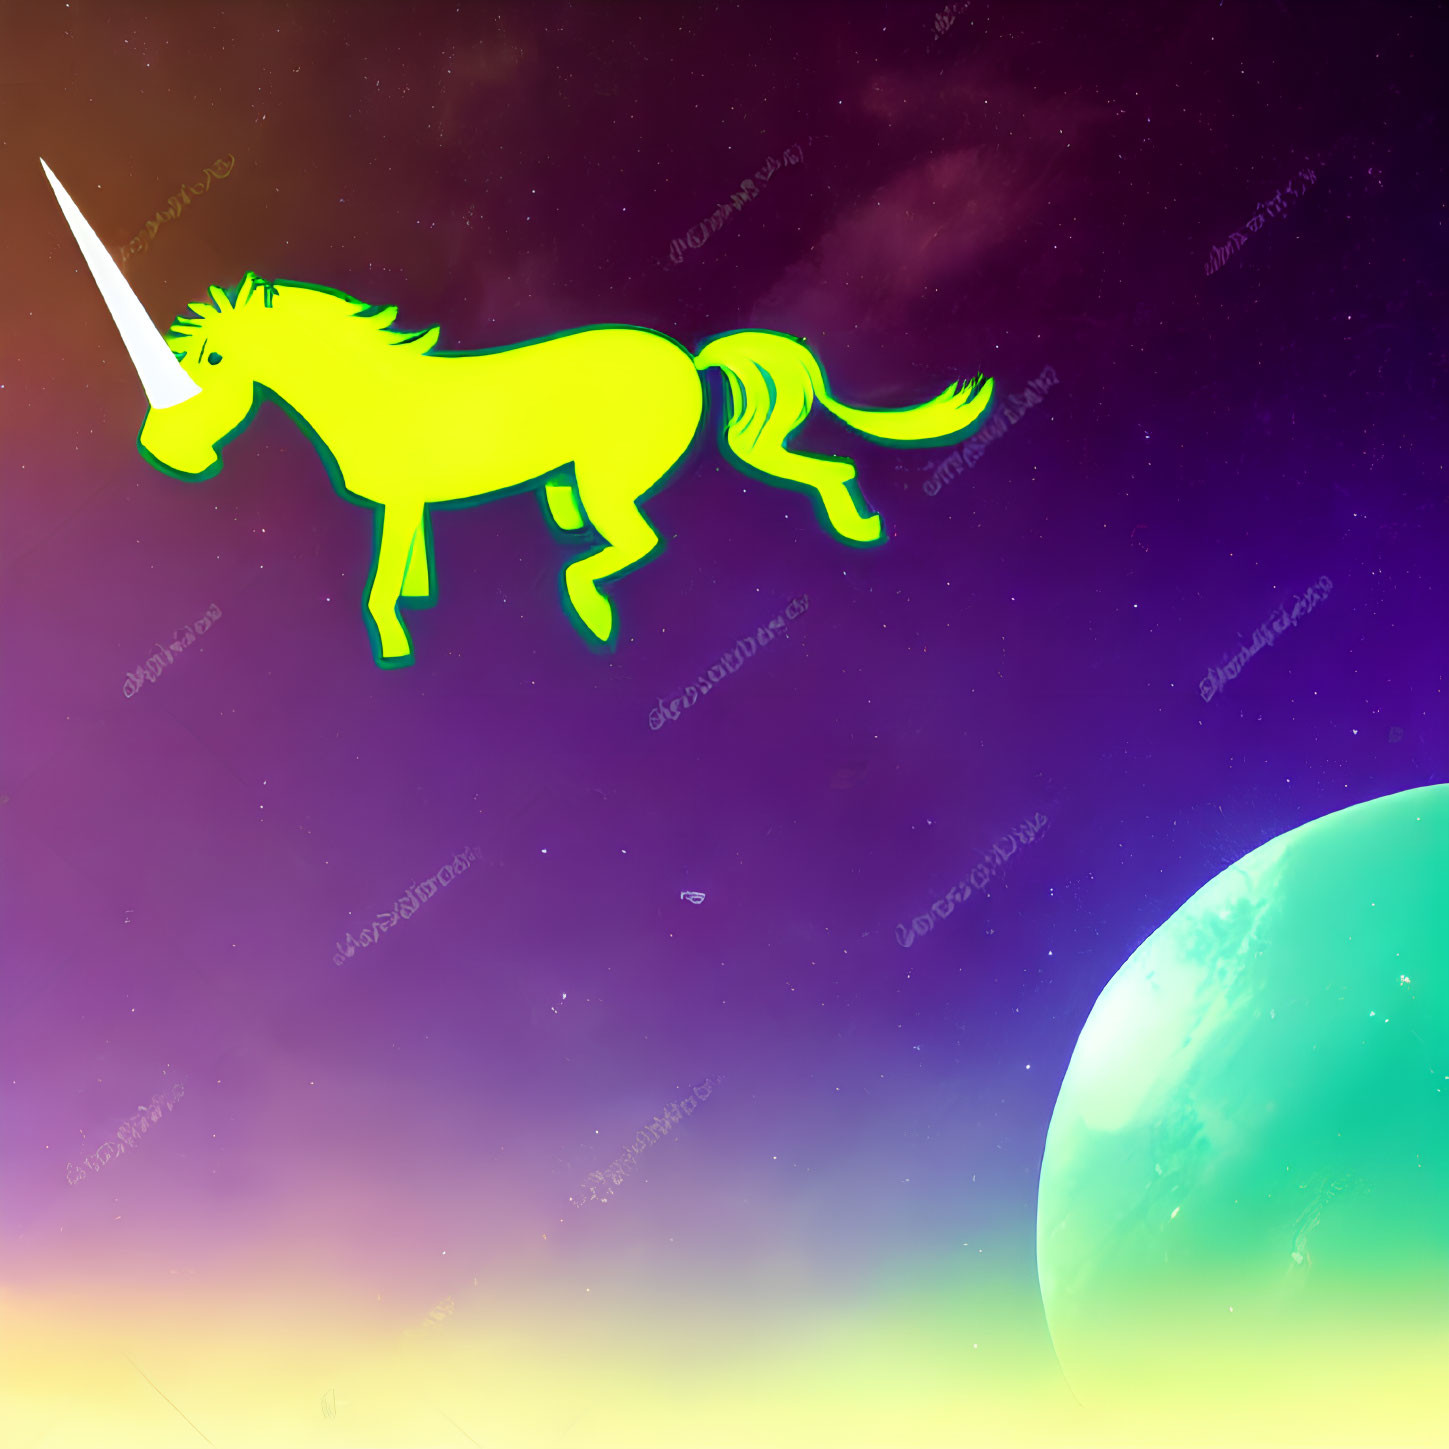 Silhouette of unicorn on cosmic background with stars and planet